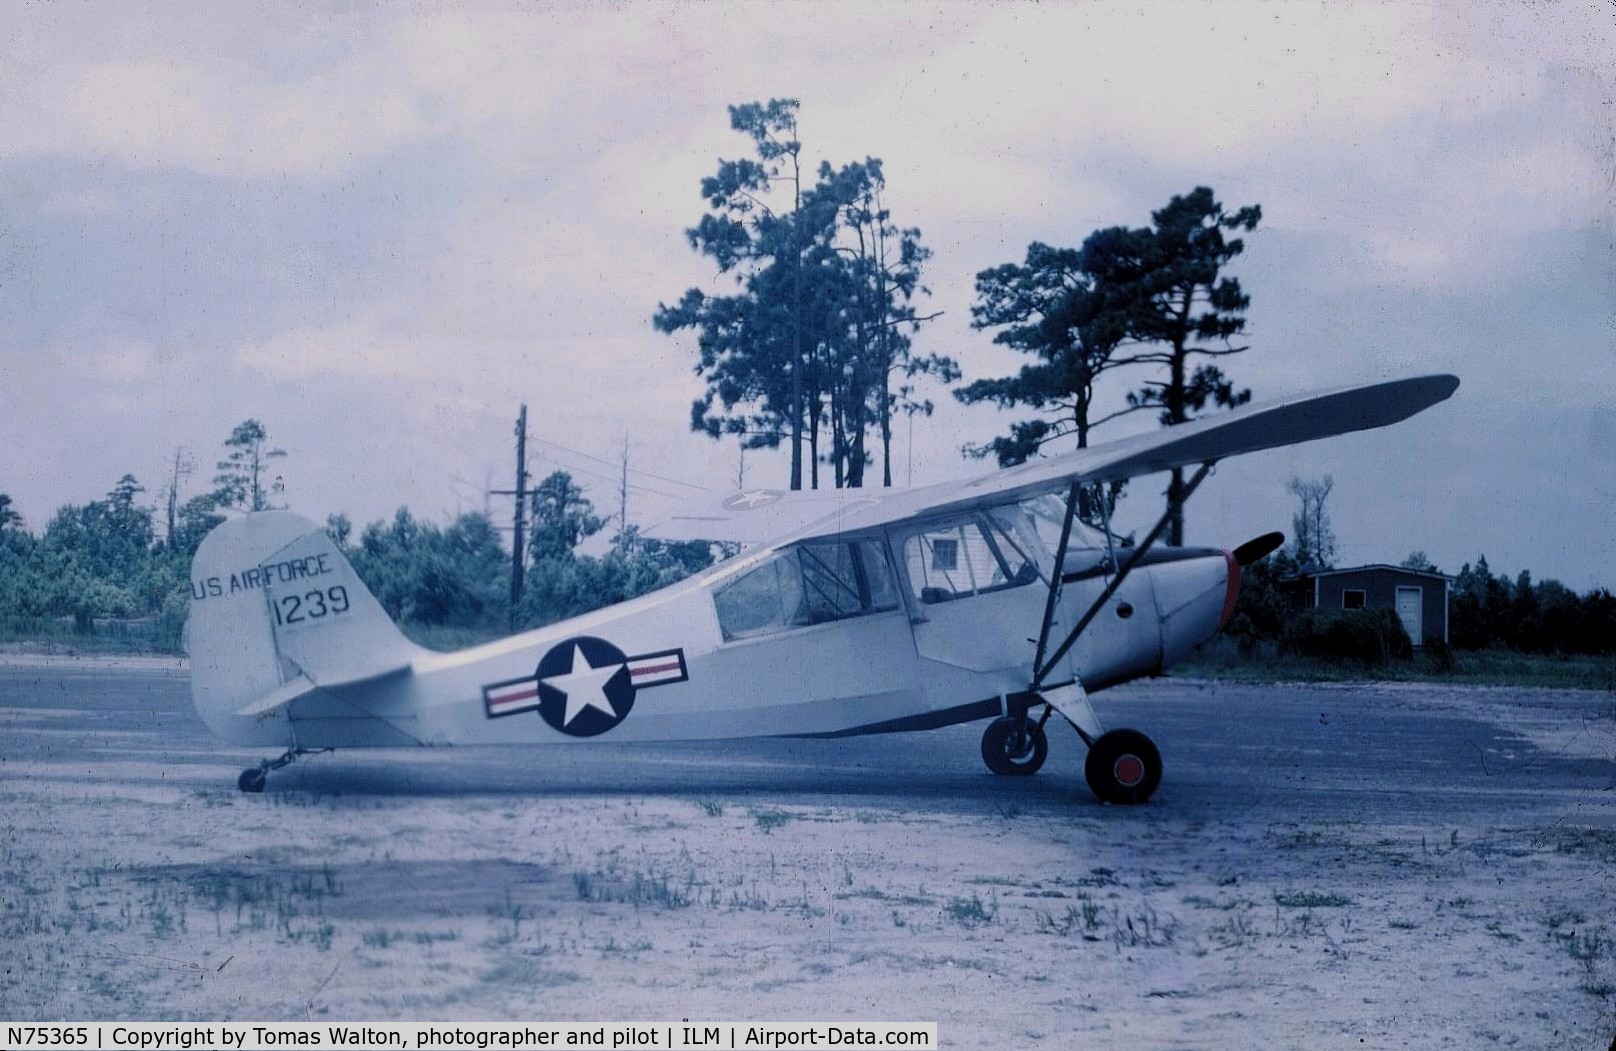 N75365, Aeronca 7BCM C/N 47-825, Taken in mid 1950s, was still a member of the air force on loan to the CAP. Lots of memories, some good, most  bad.